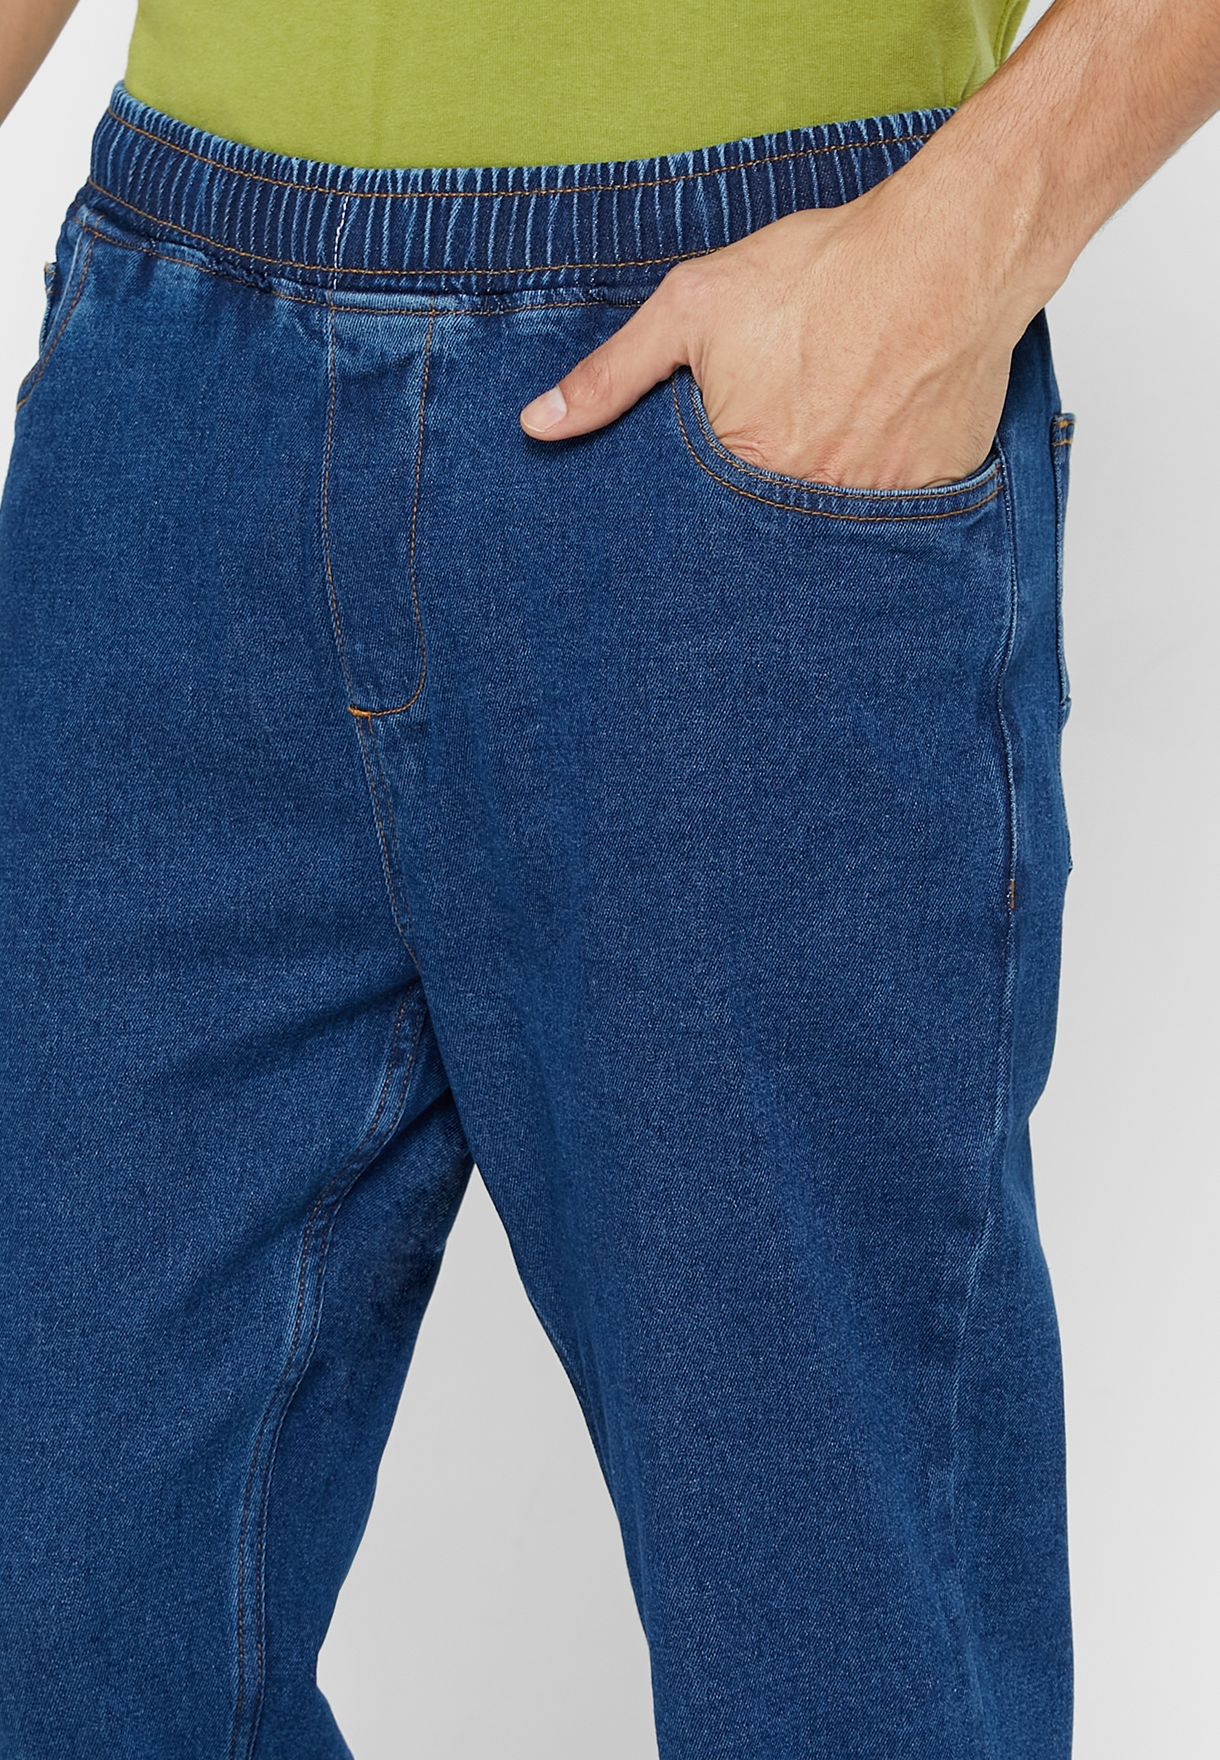 Relaxed Fit 5 Pocket Jean